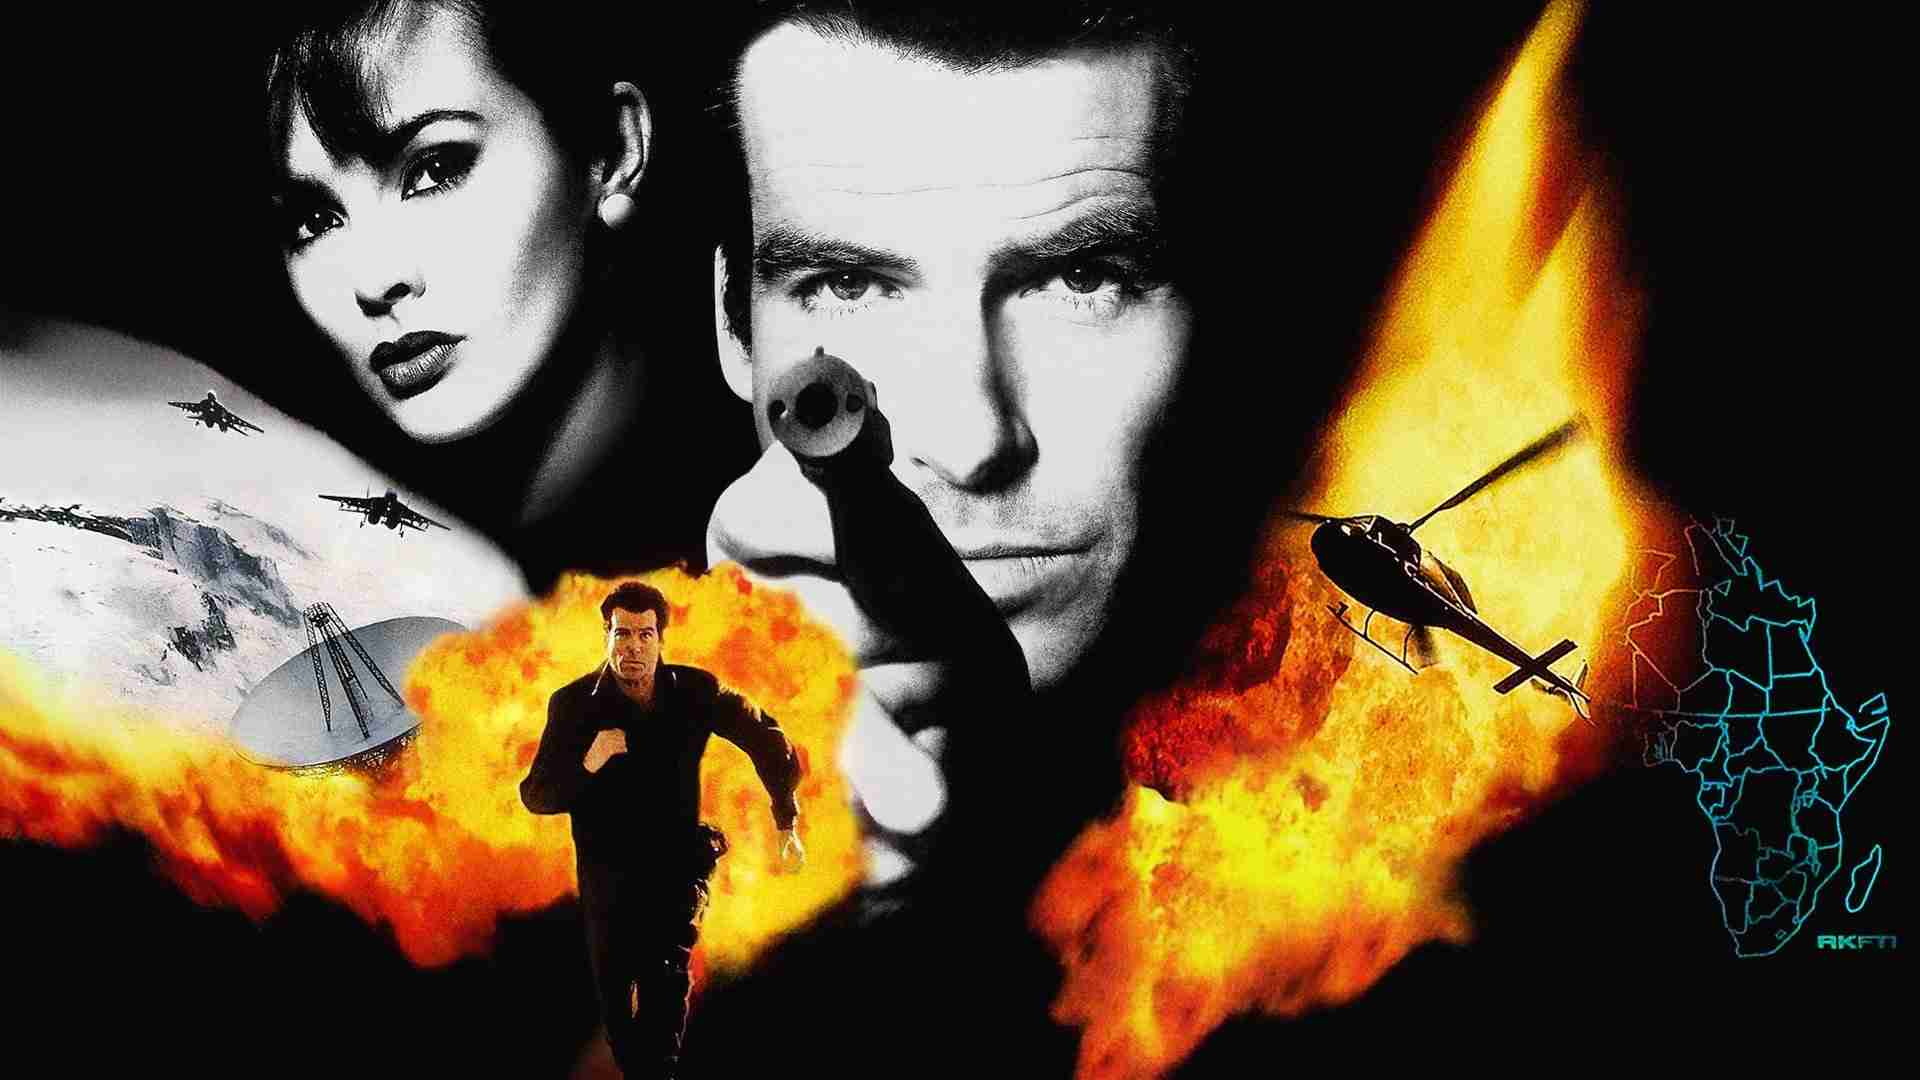 Hi-Fi Rush, GoldenEye 007, Age of Empires II, and more coming soon to Xbox Game Pass